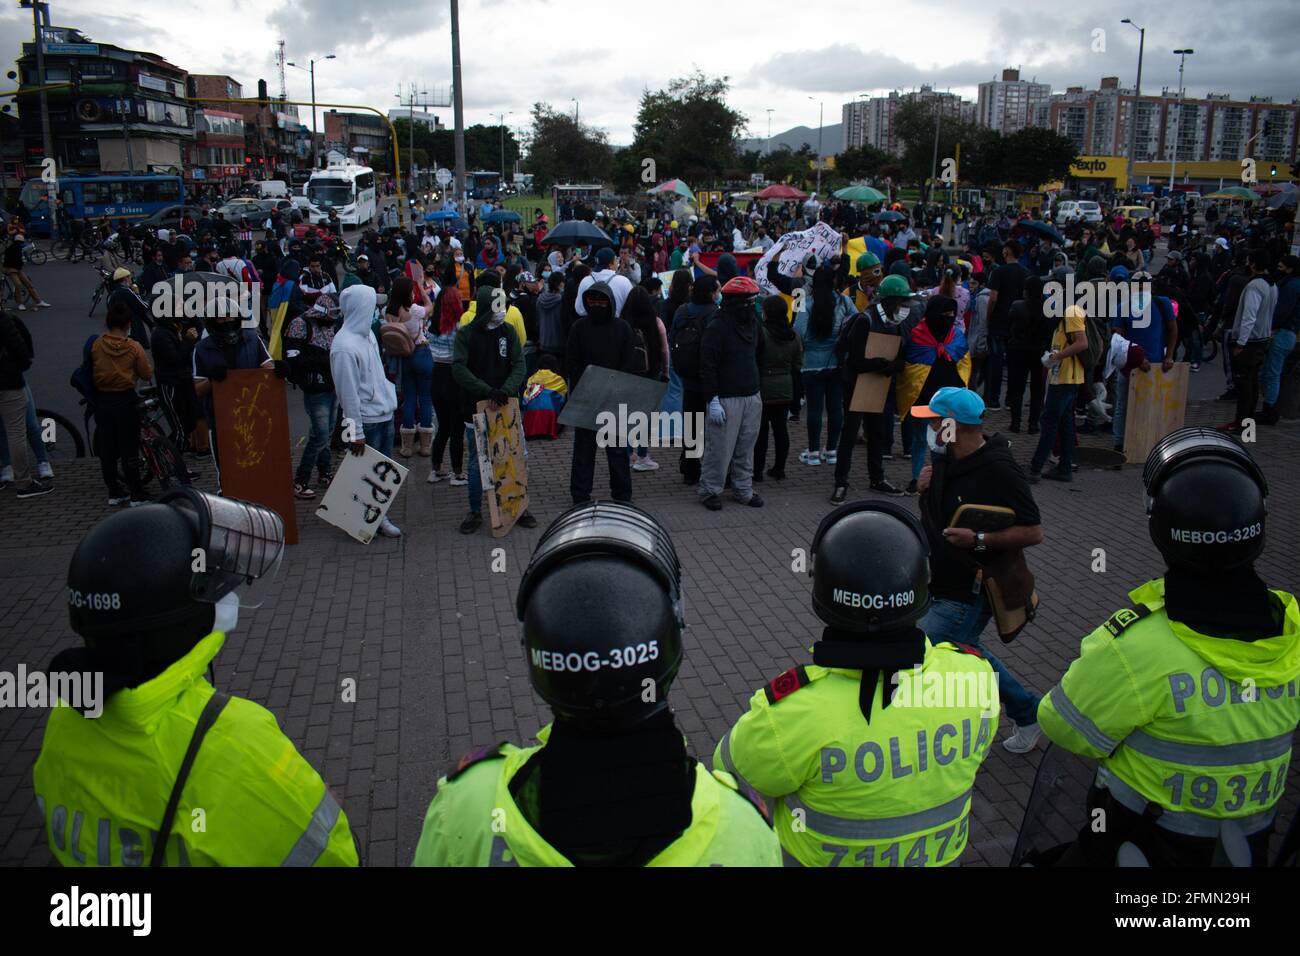 Bogota, Cundinamarca, Colombia. 10th May, 2021. Bogota faces its 13 day of anti-government protests against the Health Reform and Police Brutality cases that rise to over 30 dead across the country since the National Strike begun. In Bogota, Colombia on May 10, 2021 Credit: Daniel Santiago Romero Chaparro/LongVisual/ZUMA Wire/Alamy Live News Stock Photo